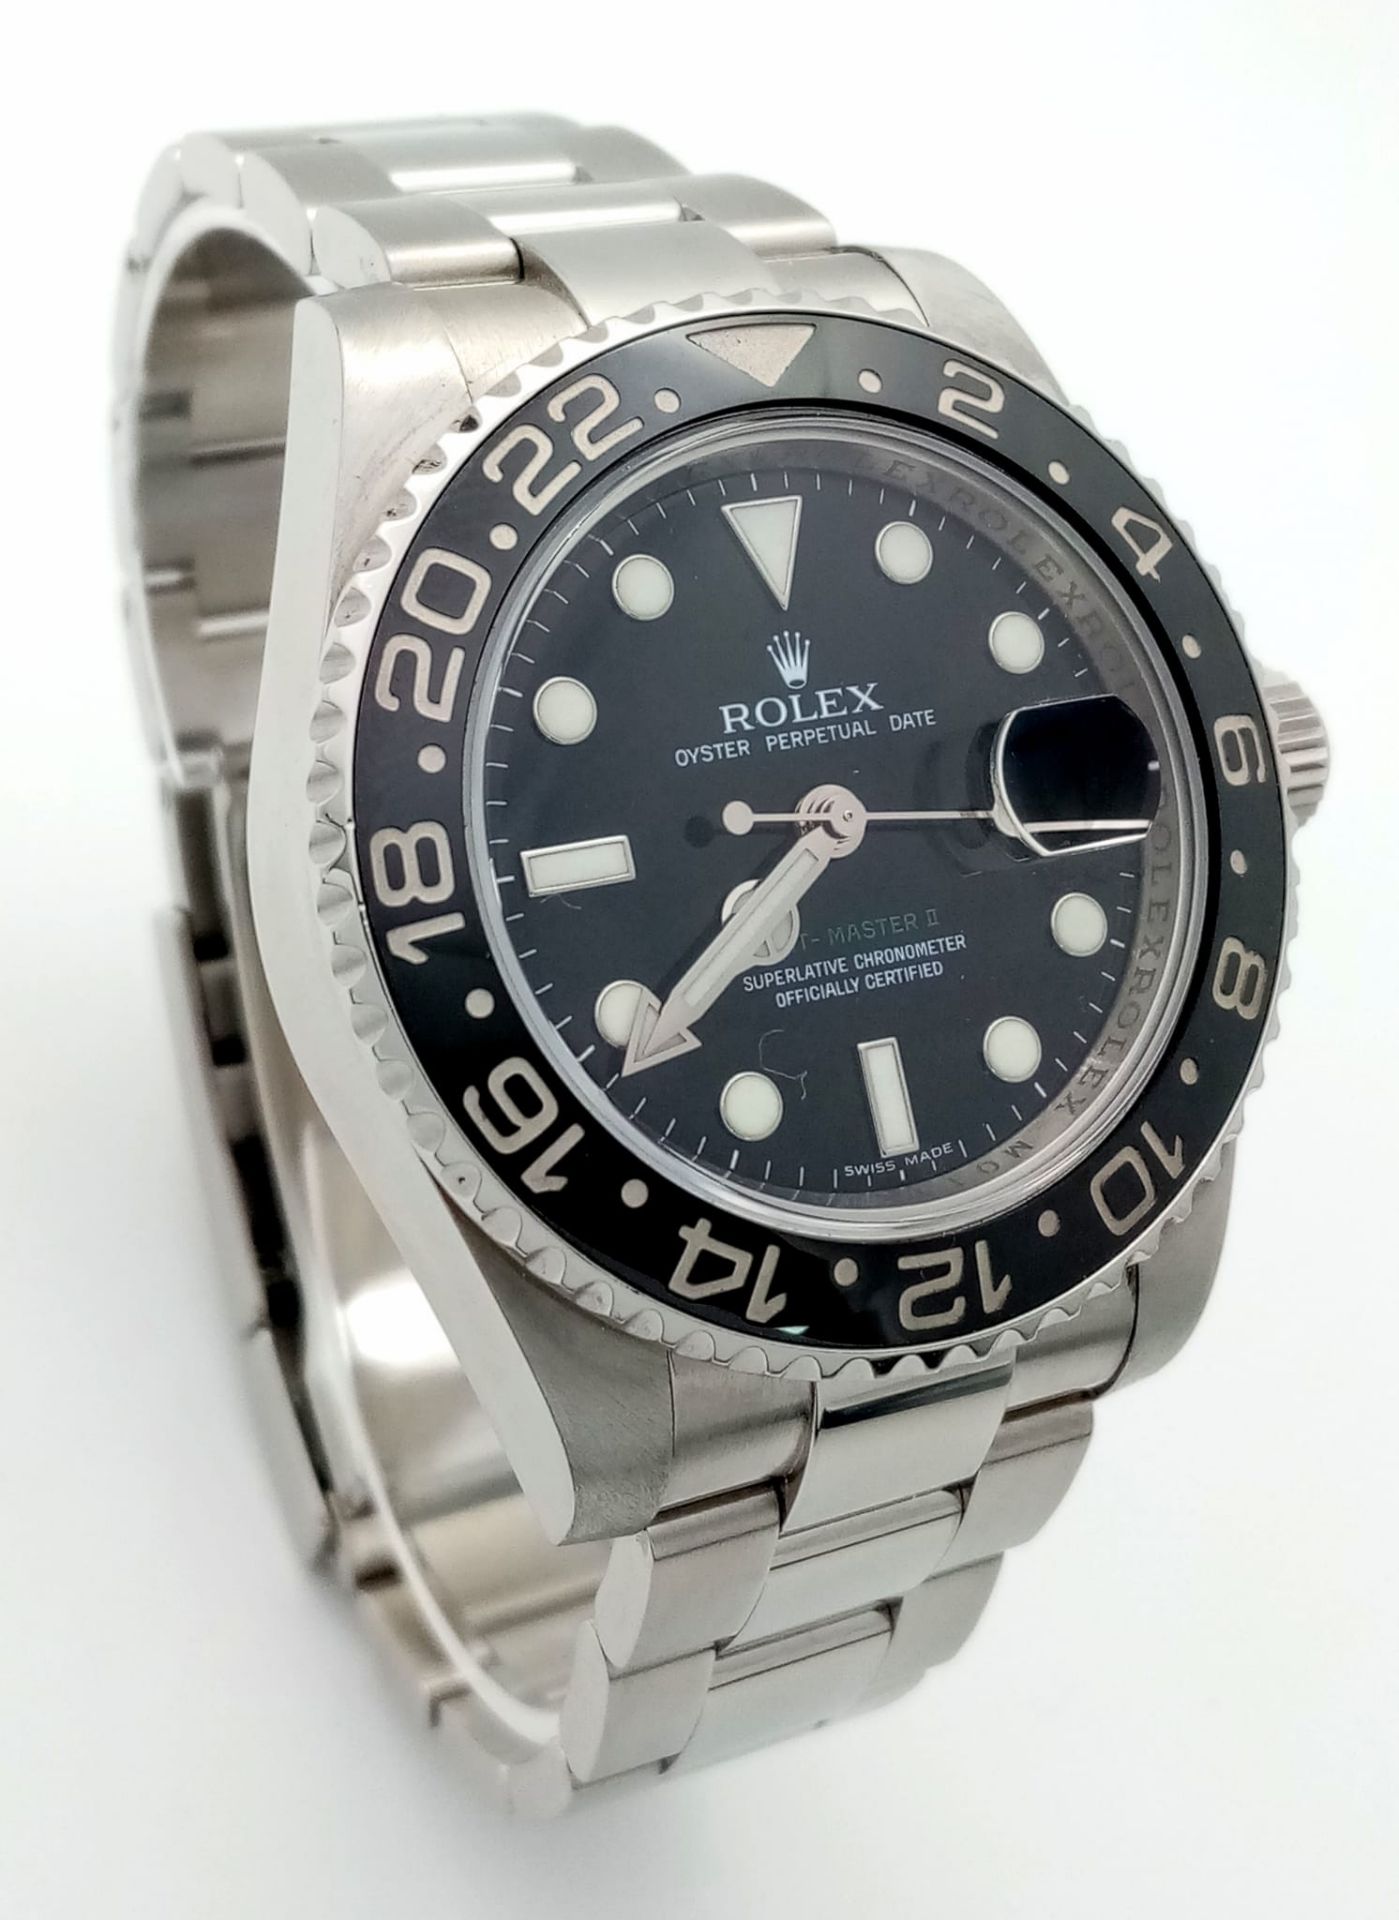 A Rolex GMT-Master II Oyster Perpetual Date Gents Watch. Model - 116710LN. Stainless steel - Image 2 of 12